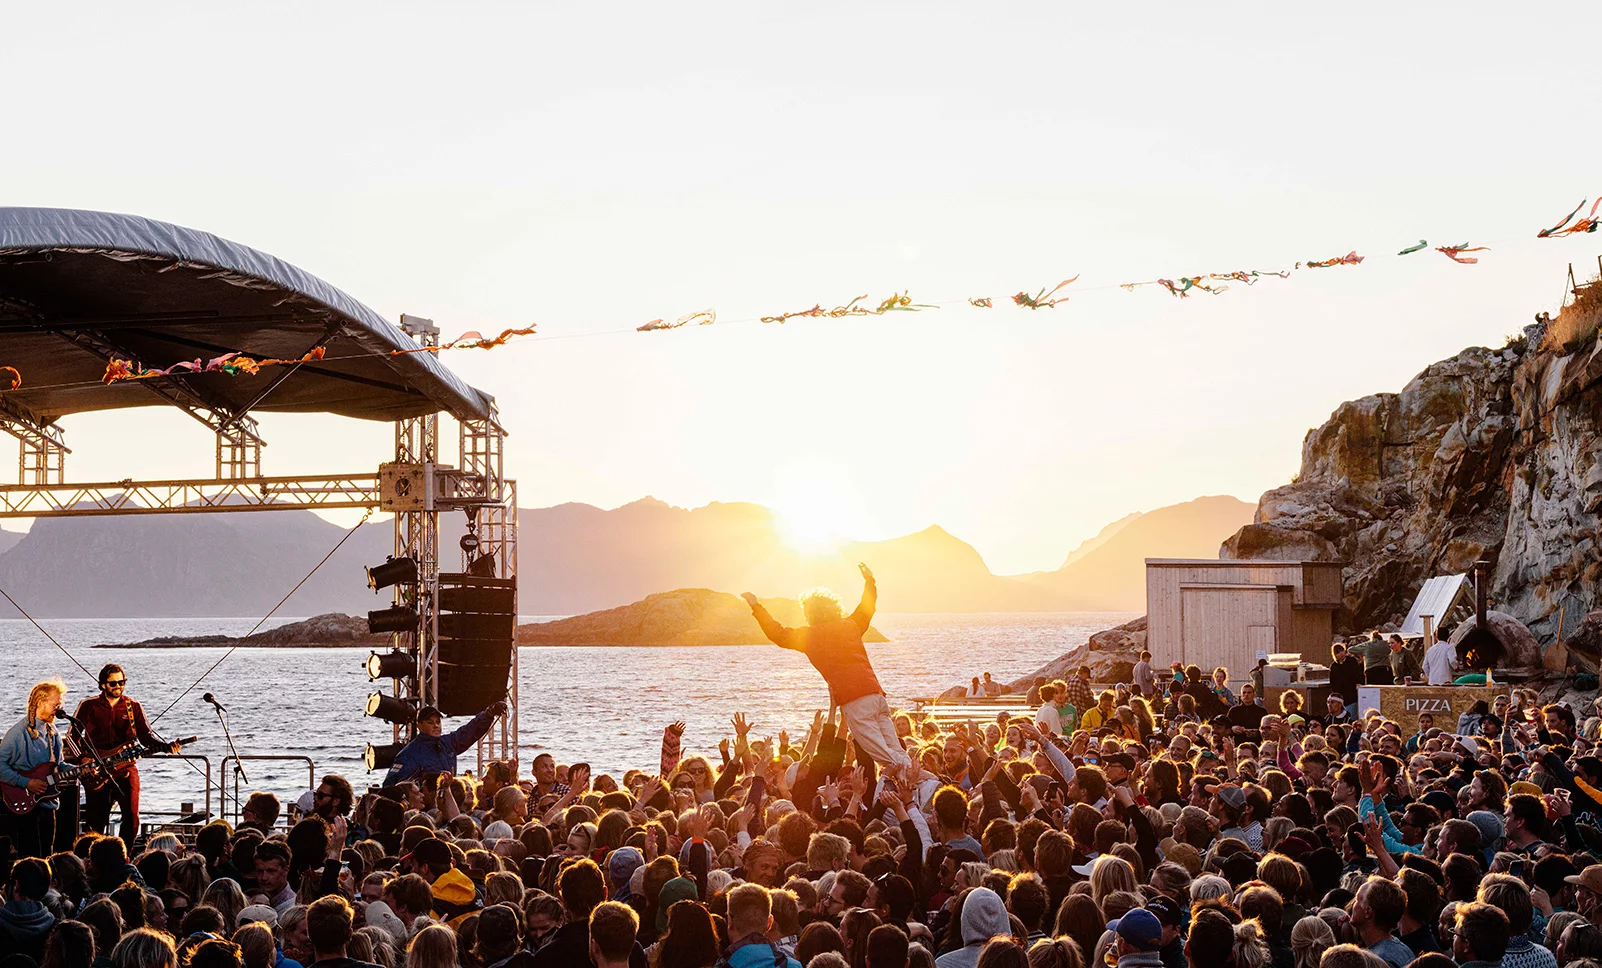 Festival and culture in Bodø Norway